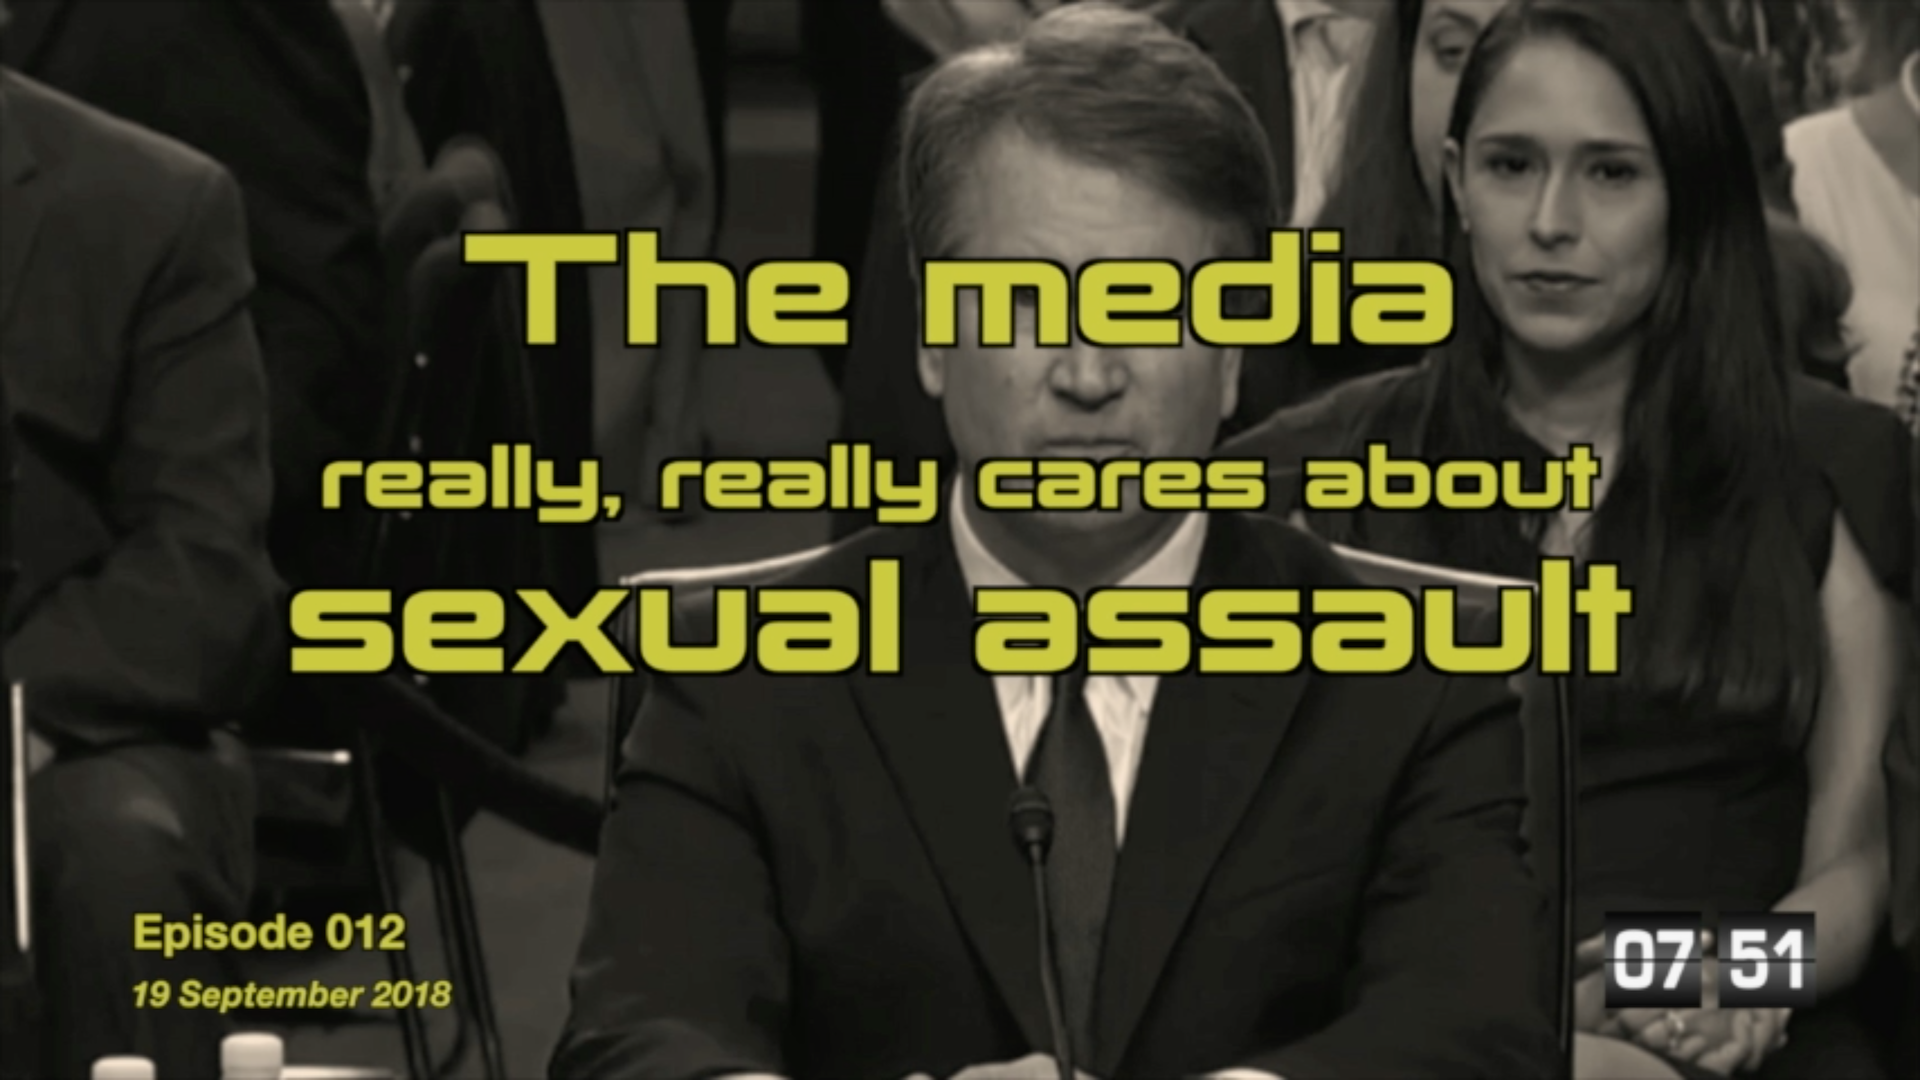 [Episode 012] The media really, really cares about sexual assault